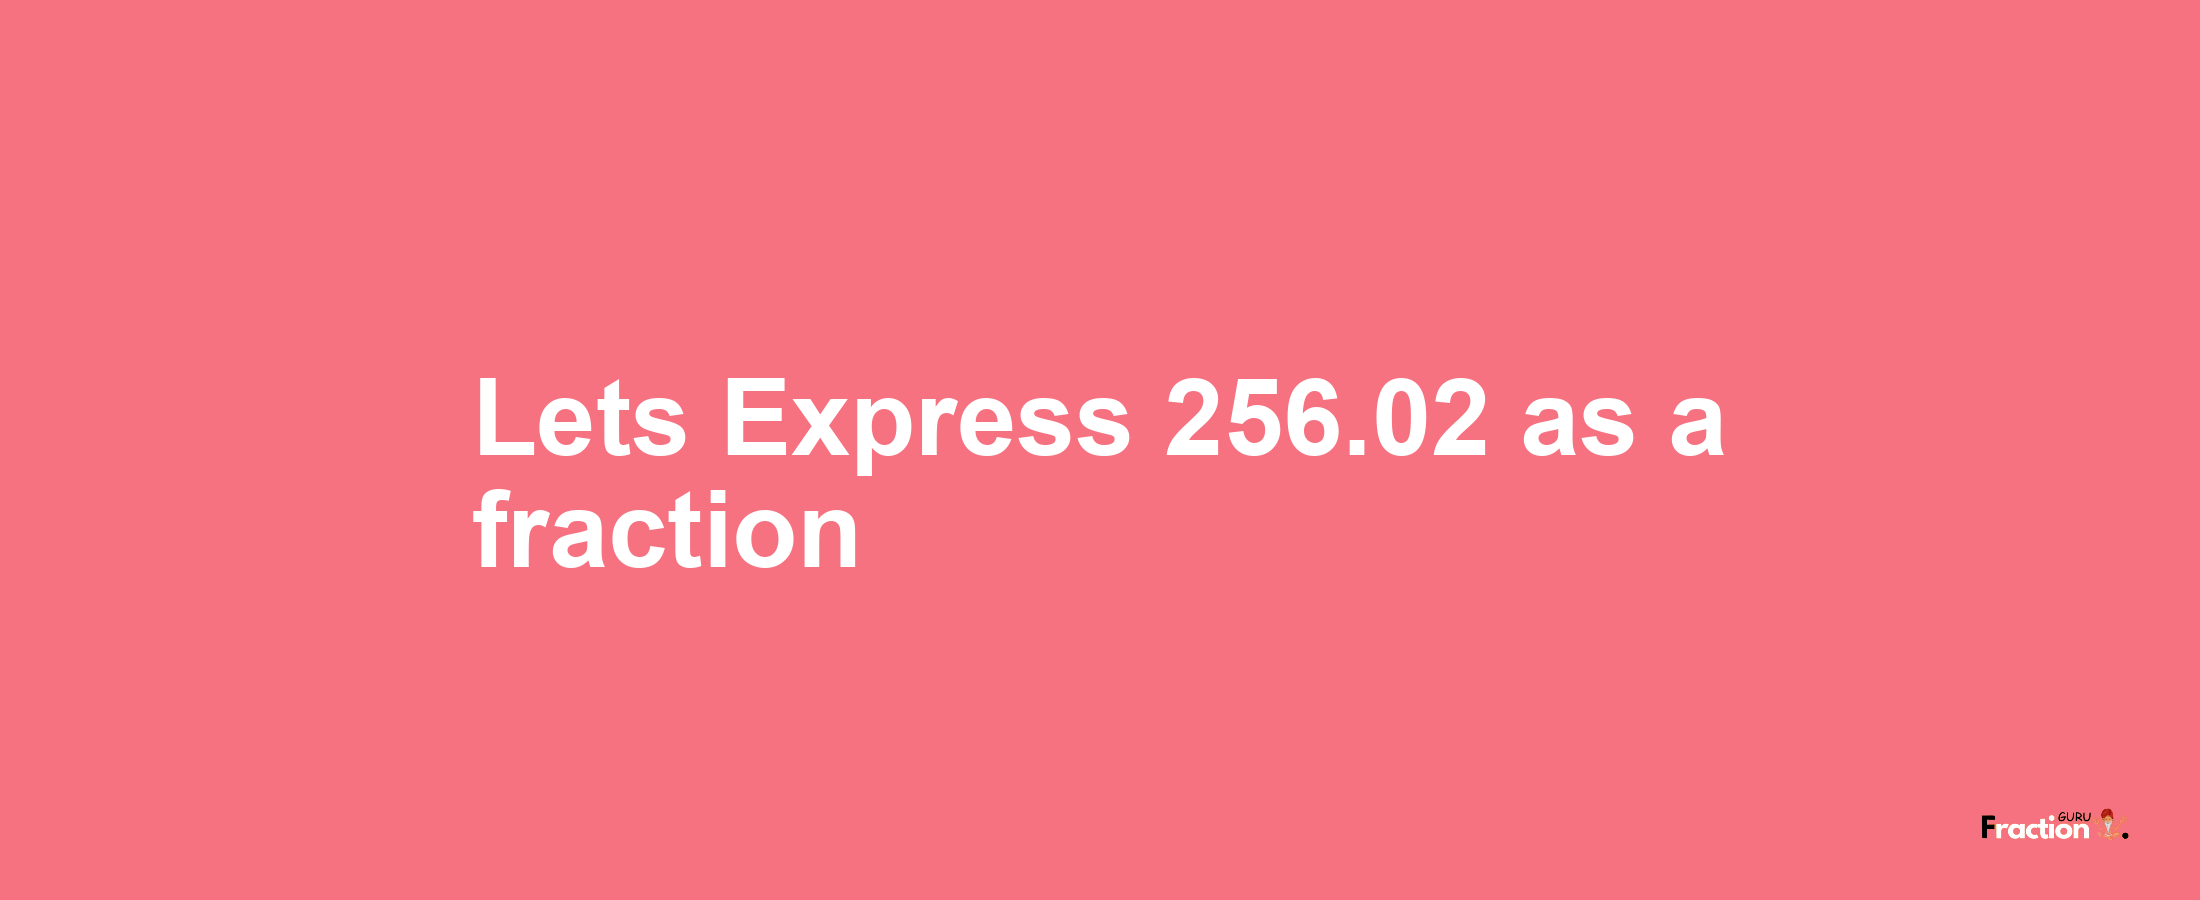 Lets Express 256.02 as afraction